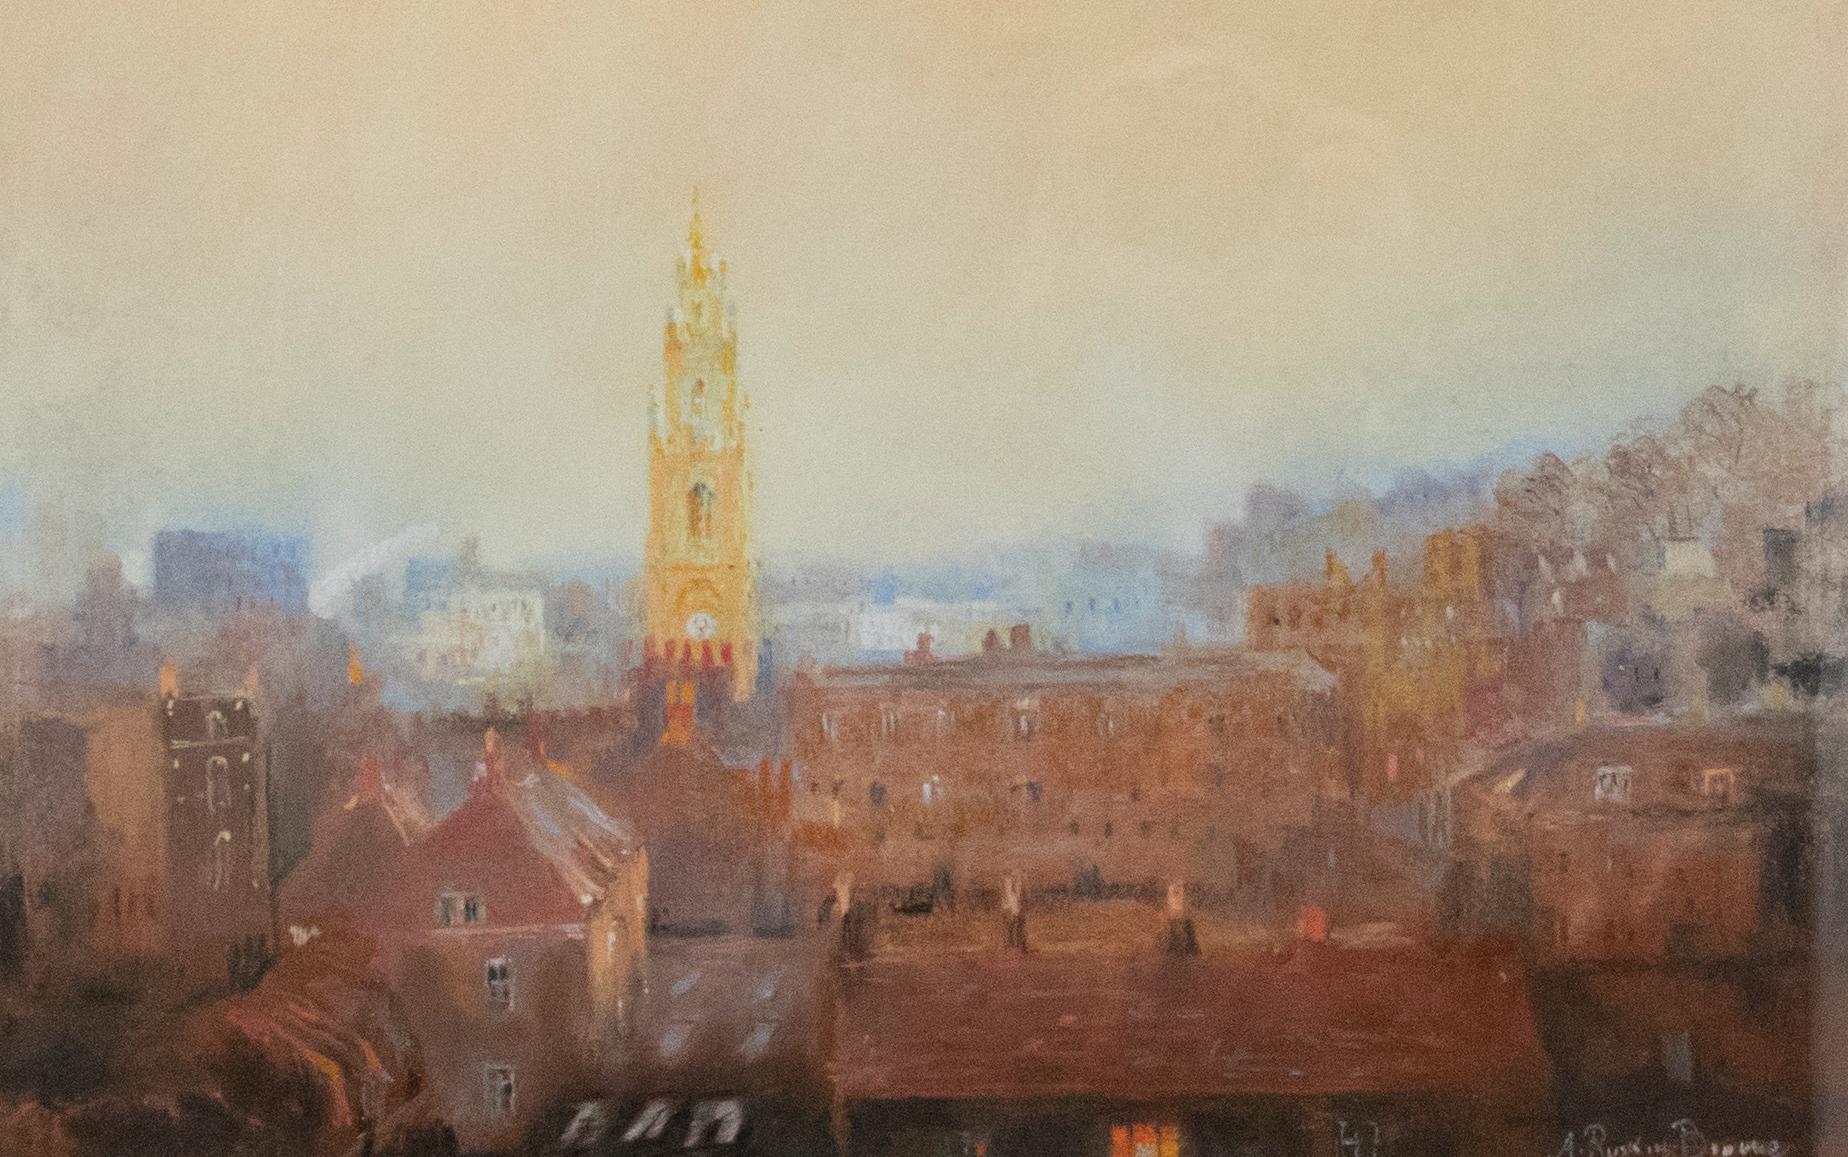  A. Ruskin-Browne - Framed 20th Century Pastel, Morning Light, Bristol - Art by Unknown